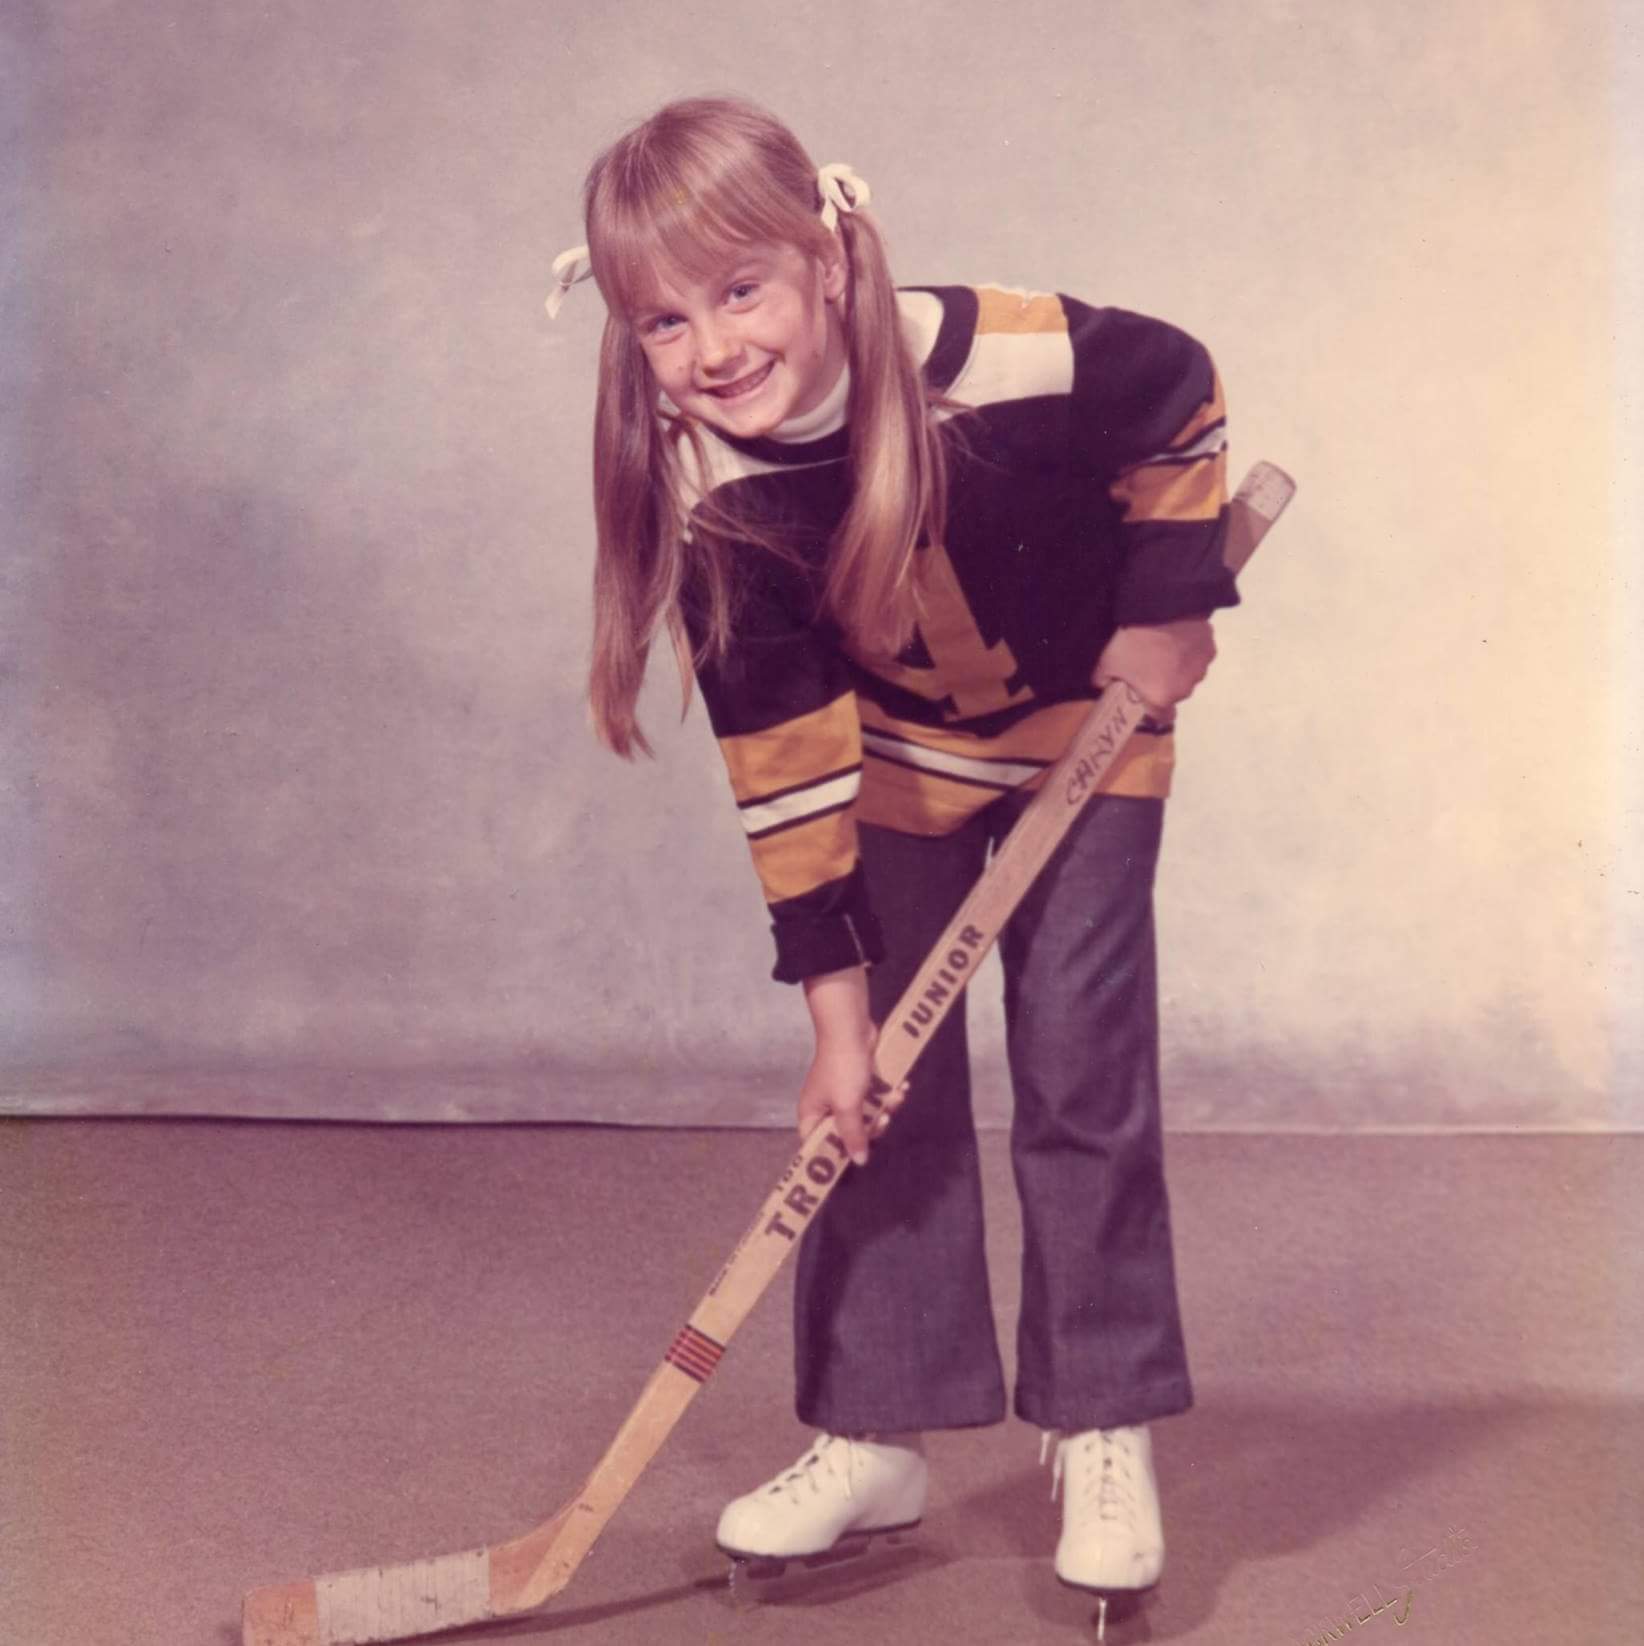 Happy Birthday Bobby Orr!! I have admired you since I was a little girl. 